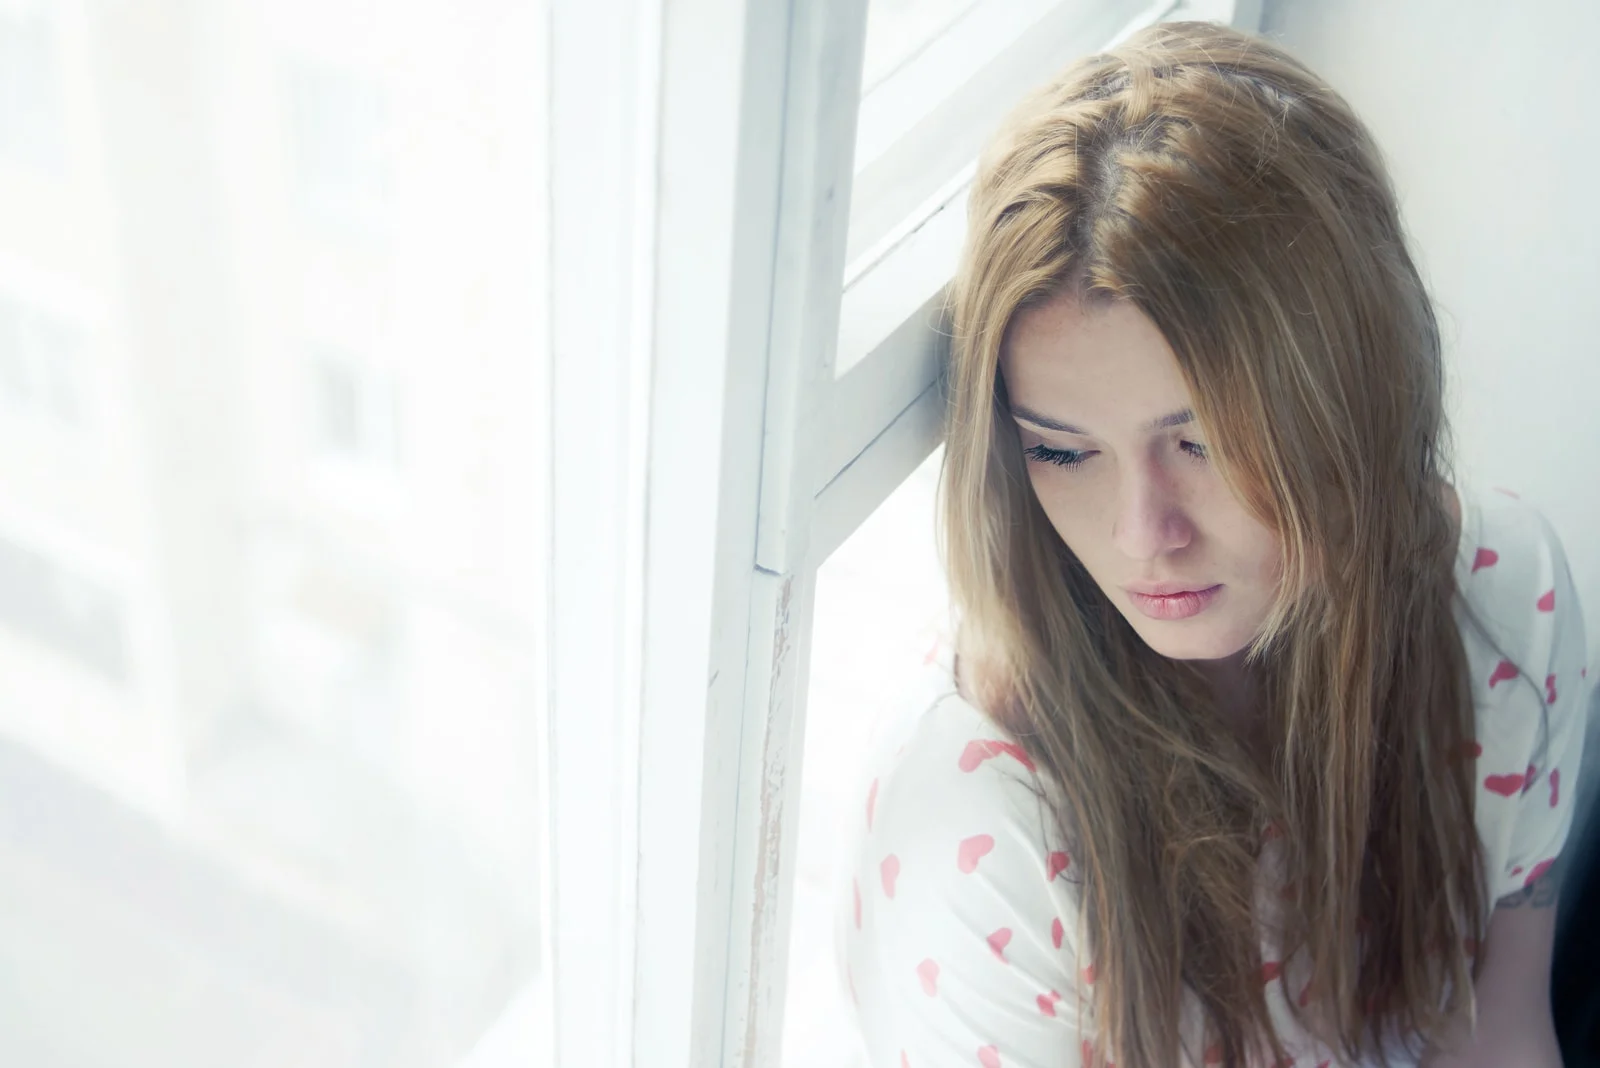 pensive sad woman looking out of window